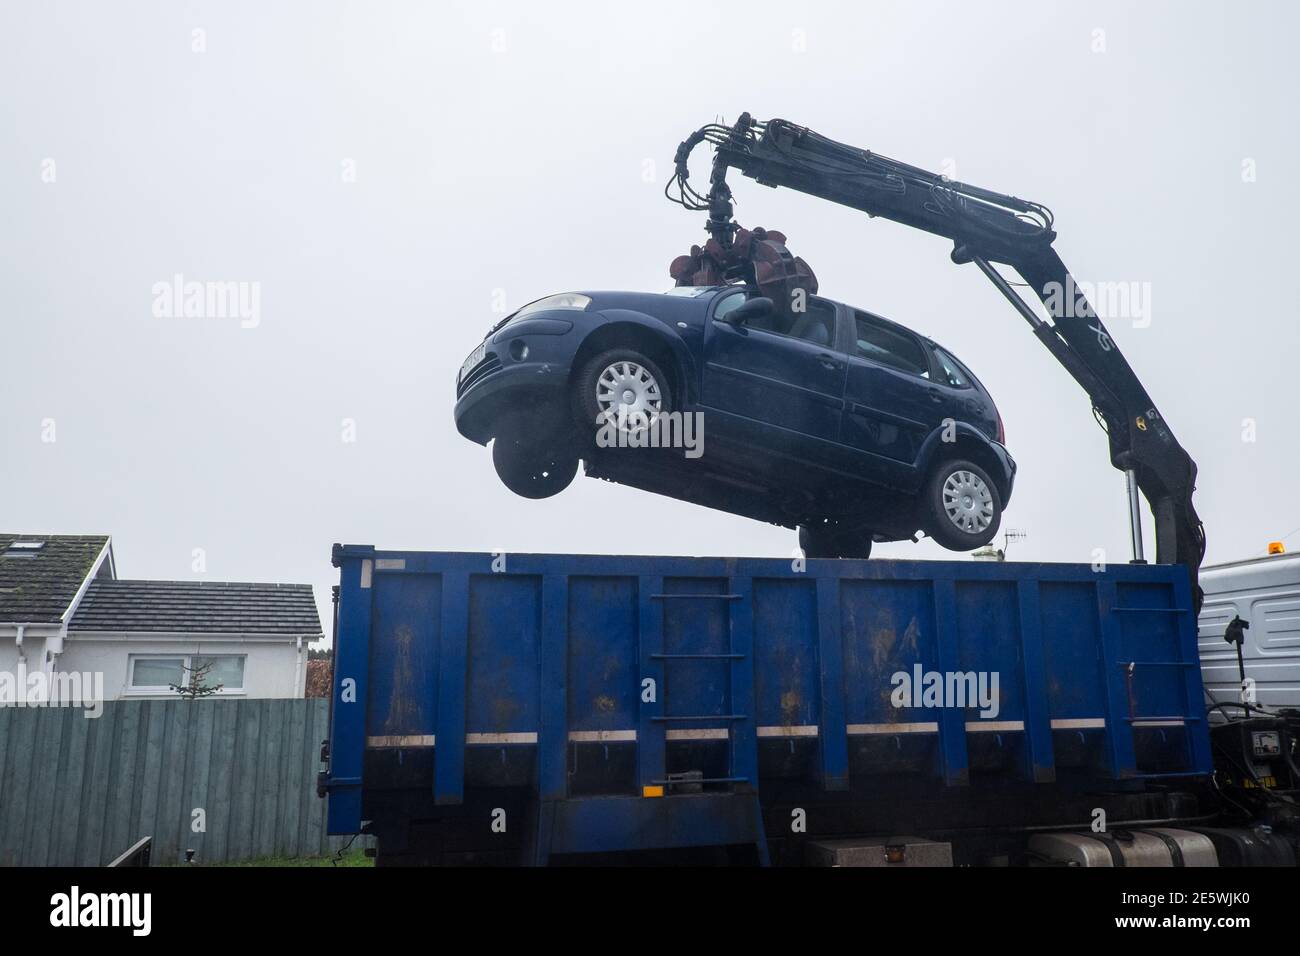 My, private, vehicle,car,a,France,French,made,built, Citroen C3,blue,hatchback,being,removed,by,crane,truck,from,my,driveway,to,be,scrap,scrapped.No,longer,economically,viable,to,maintain,due,to,rust,and,not wanting to throw good money after badge decision, had to be made to destroy vehicle. Failed, MOT. DVLA, Photo taken in seaside resort of Borth,a,few,miles,north,of,Aberystwyth,Ceredigion,Mid,West Wales,Welsh,holiday destination.UK,Europe,mobile,scrapyard,end of life,gone,waste,consumption,throw away,society,recycling,reuse,not,metal,cars,vehicles,crush,grabber,machine,grabbing, Stock Photo